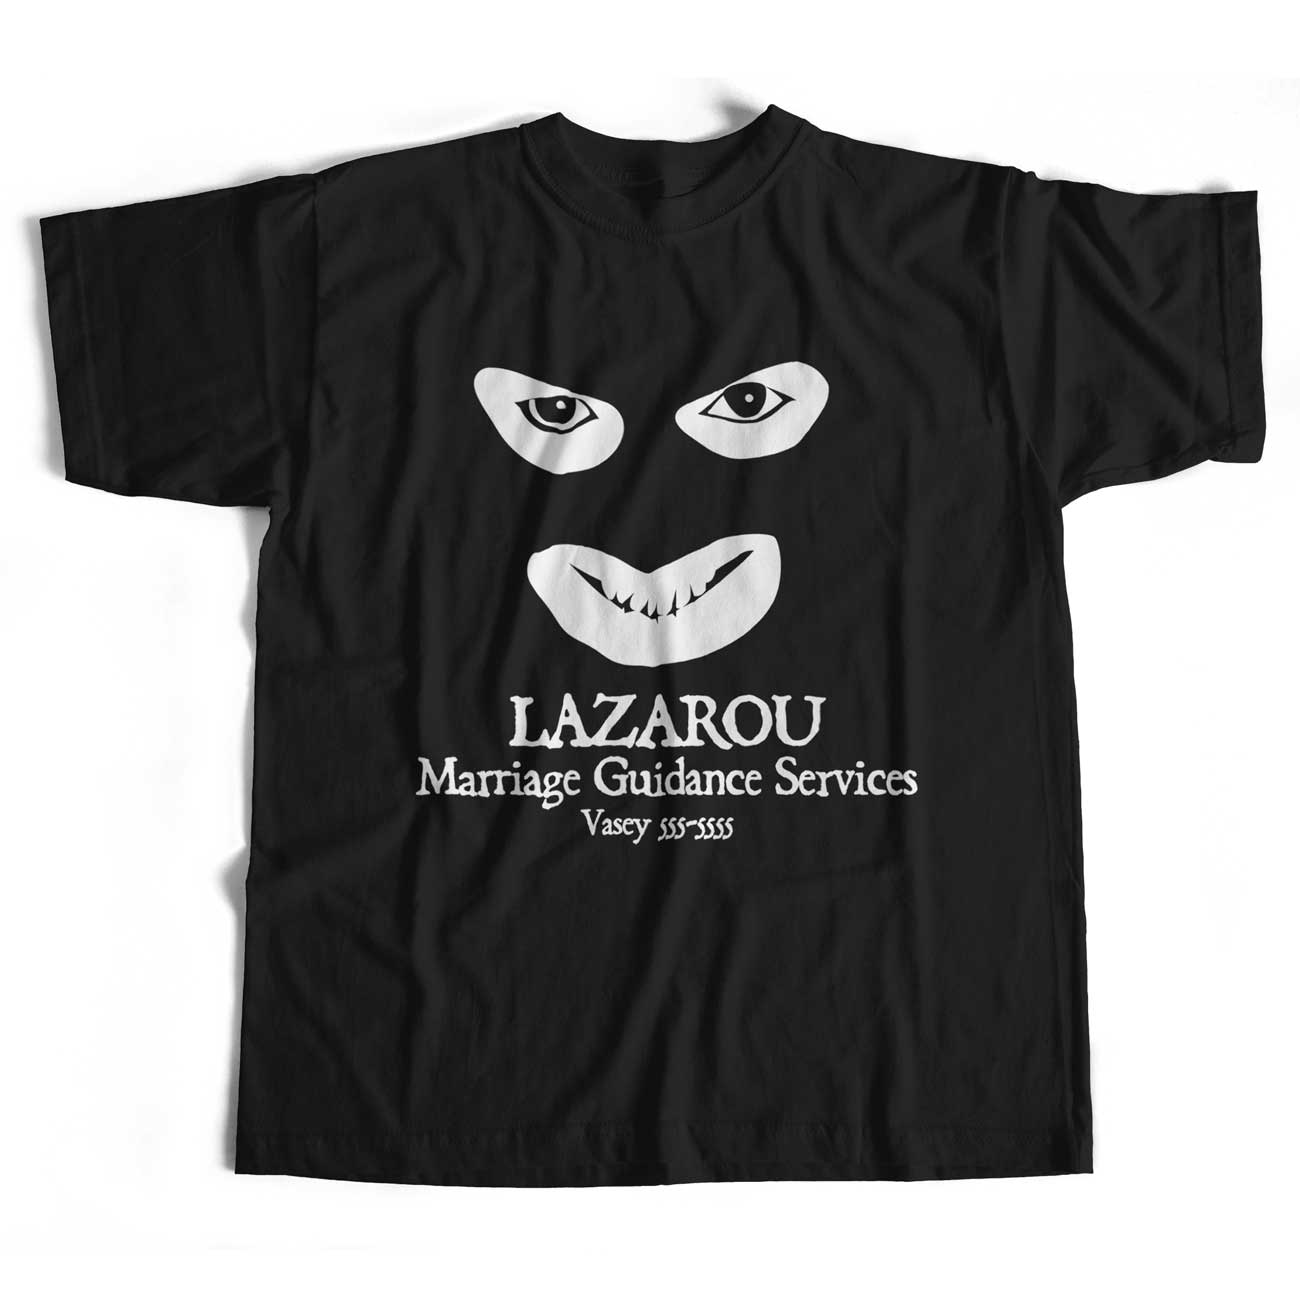 Inspired by The League Of Gentlemen - Papa Lazarou T Shirt Lazarou Marriage Guidance Services